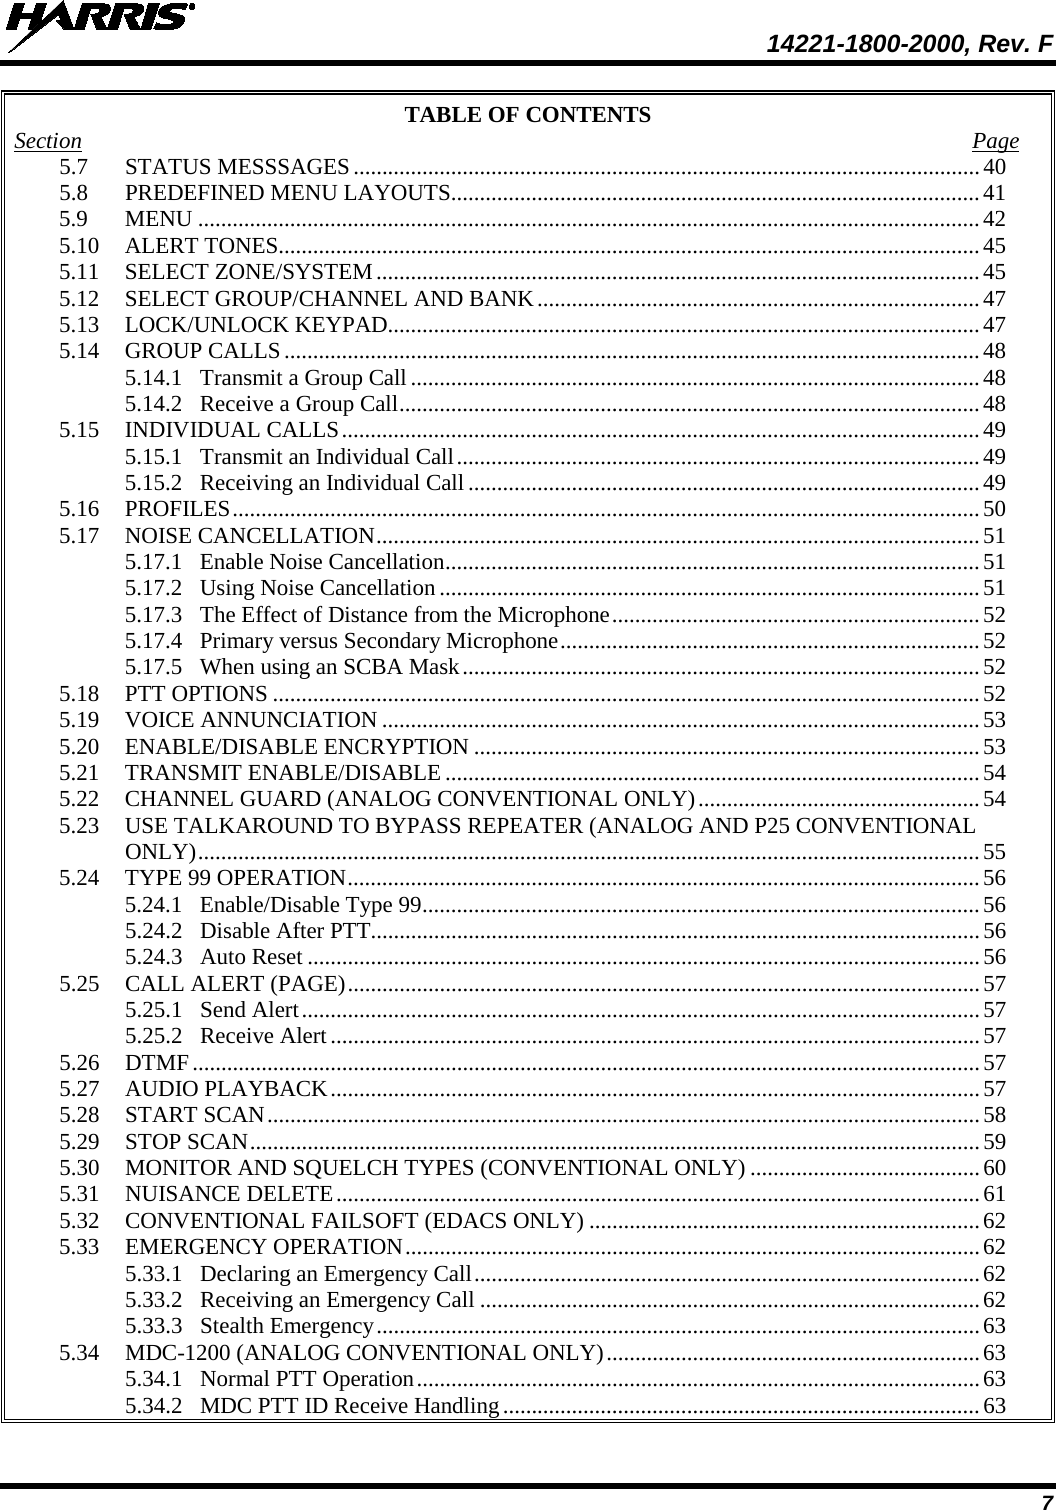  14221-1800-2000, Rev. F 7 TABLE OF CONTENTS Section  Page 5.7 STATUS MESSSAGES ............................................................................................................. 40 5.8 PREDEFINED MENU LAYOUTS............................................................................................ 41 5.9 MENU ........................................................................................................................................ 42 5.10 ALERT TONES.......................................................................................................................... 45 5.11 SELECT ZONE/SYSTEM ......................................................................................................... 45 5.12 SELECT GROUP/CHANNEL AND BANK ............................................................................. 47 5.13 LOCK/UNLOCK KEYPAD....................................................................................................... 47 5.14 GROUP CALLS ......................................................................................................................... 48 5.14.1 Transmit a Group Call ................................................................................................... 48 5.14.2 Receive a Group Call ..................................................................................................... 48 5.15 INDIVIDUAL CALLS ............................................................................................................... 49 5.15.1 Transmit an Individual Call ........................................................................................... 49 5.15.2 Receiving an Individual Call ......................................................................................... 49 5.16 PROFILES .................................................................................................................................. 50 5.17 NOISE CANCELLATION ......................................................................................................... 51 5.17.1 Enable Noise Cancellation ............................................................................................. 51 5.17.2 Using Noise Cancellation .............................................................................................. 51 5.17.3 The Effect of Distance from the Microphone ................................................................ 52 5.17.4 Primary versus Secondary Microphone ......................................................................... 52 5.17.5 When using an SCBA Mask .......................................................................................... 52 5.18 PTT OPTIONS ........................................................................................................................... 52 5.19 VOICE ANNUNCIATION ........................................................................................................ 53 5.20 ENABLE/DISABLE ENCRYPTION ........................................................................................ 53 5.21 TRANSMIT ENABLE/DISABLE ............................................................................................. 54 5.22 CHANNEL GUARD (ANALOG CONVENTIONAL ONLY) ................................................. 54 5.23 USE TALKAROUND TO BYPASS REPEATER (ANALOG AND P25 CONVENTIONAL ONLY) ........................................................................................................................................ 55 5.24 TYPE 99 OPERATION .............................................................................................................. 56 5.24.1 Enable/Disable Type 99 ................................................................................................. 56 5.24.2 Disable After PTT.......................................................................................................... 56 5.24.3 Auto Reset ..................................................................................................................... 56 5.25 CALL ALERT (PAGE) .............................................................................................................. 57 5.25.1 Send Alert ...................................................................................................................... 57 5.25.2 Receive Alert ................................................................................................................. 57 5.26 DTMF ......................................................................................................................................... 57 5.27 AUDIO PLAYBACK ................................................................................................................. 57 5.28 START SCAN ............................................................................................................................ 58 5.29 STOP SCAN ............................................................................................................................... 59 5.30 MONITOR AND SQUELCH TYPES (CONVENTIONAL ONLY) ........................................ 60 5.31 NUISANCE DELETE ................................................................................................................ 61 5.32 CONVENTIONAL FAILSOFT (EDACS ONLY) .................................................................... 62 5.33 EMERGENCY OPERATION .................................................................................................... 62 5.33.1 Declaring an Emergency Call ........................................................................................ 62 5.33.2 Receiving an Emergency Call ....................................................................................... 62 5.33.3 Stealth Emergency ......................................................................................................... 63 5.34 MDC-1200 (ANALOG CONVENTIONAL ONLY) ................................................................. 63 5.34.1 Normal PTT Operation .................................................................................................. 63 5.34.2 MDC PTT ID Receive Handling ................................................................................... 63 